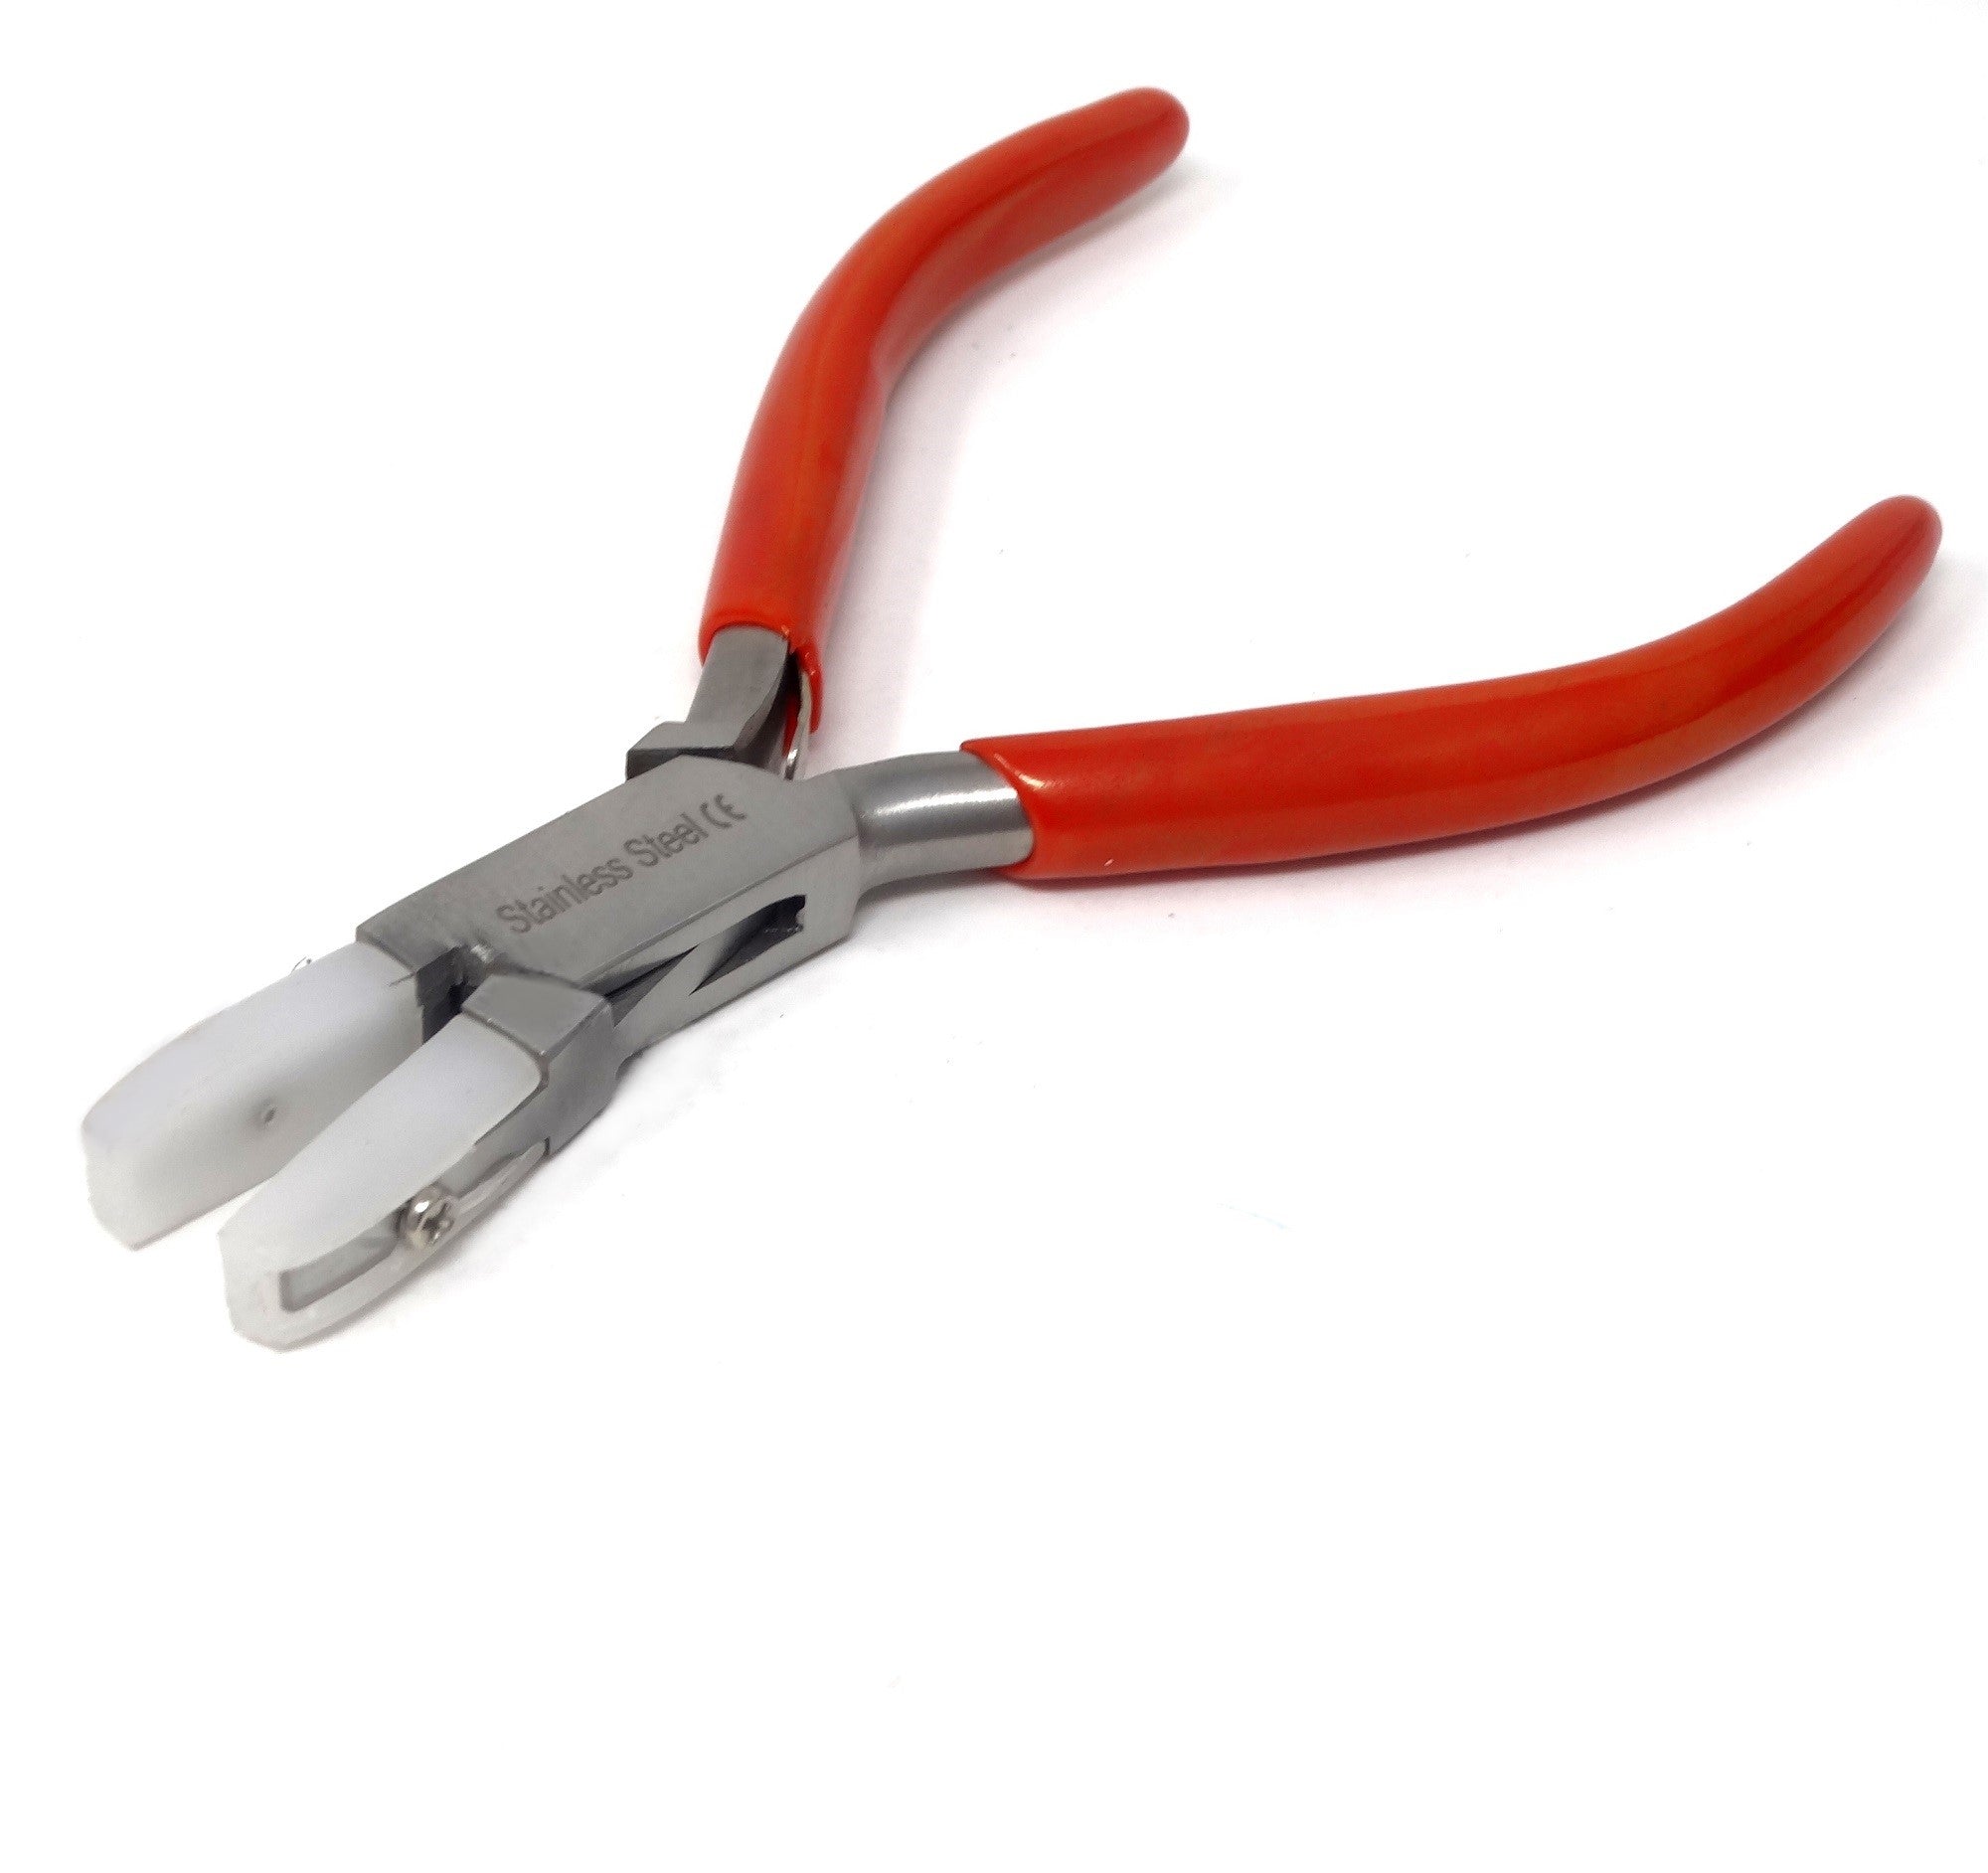 Sharp Flush Cutter Jewelers Beading Wire Cutters Pliers 4 1/2